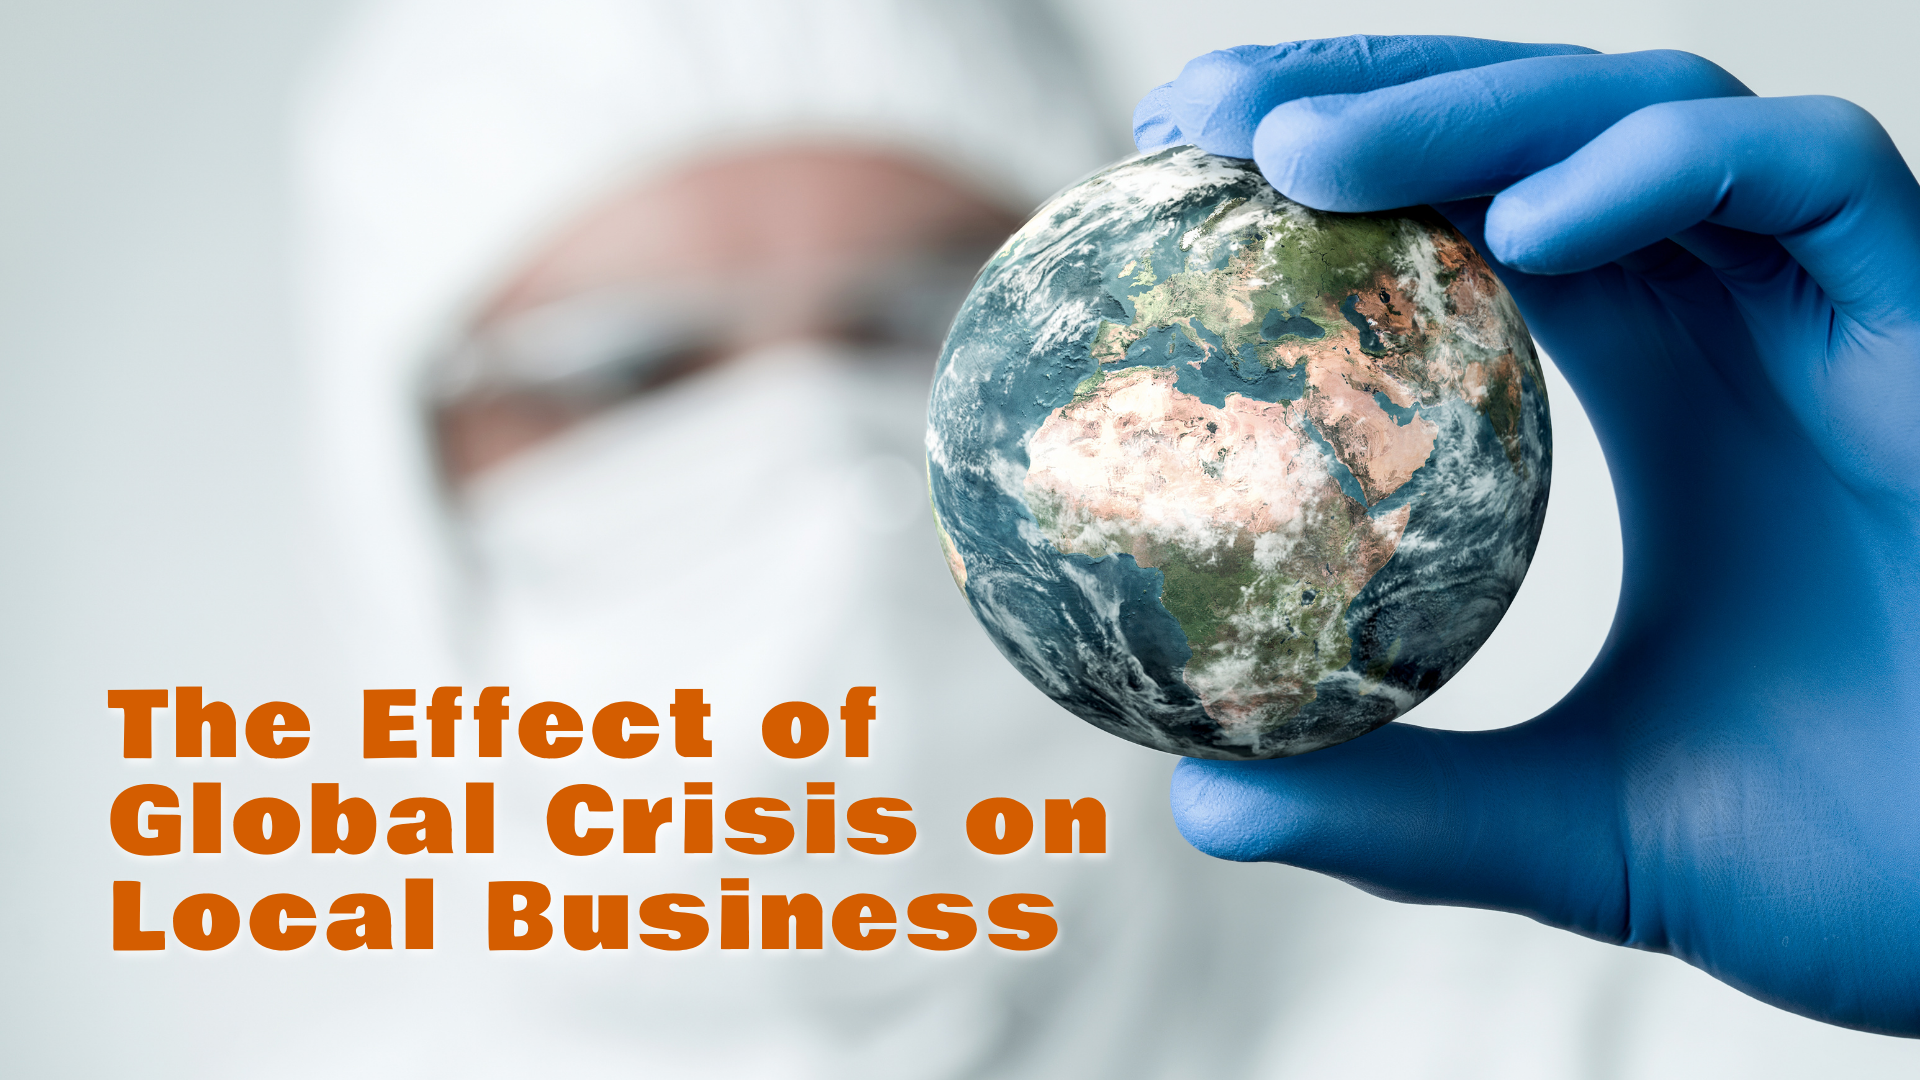 The Effect of Global Crisis on Local Business